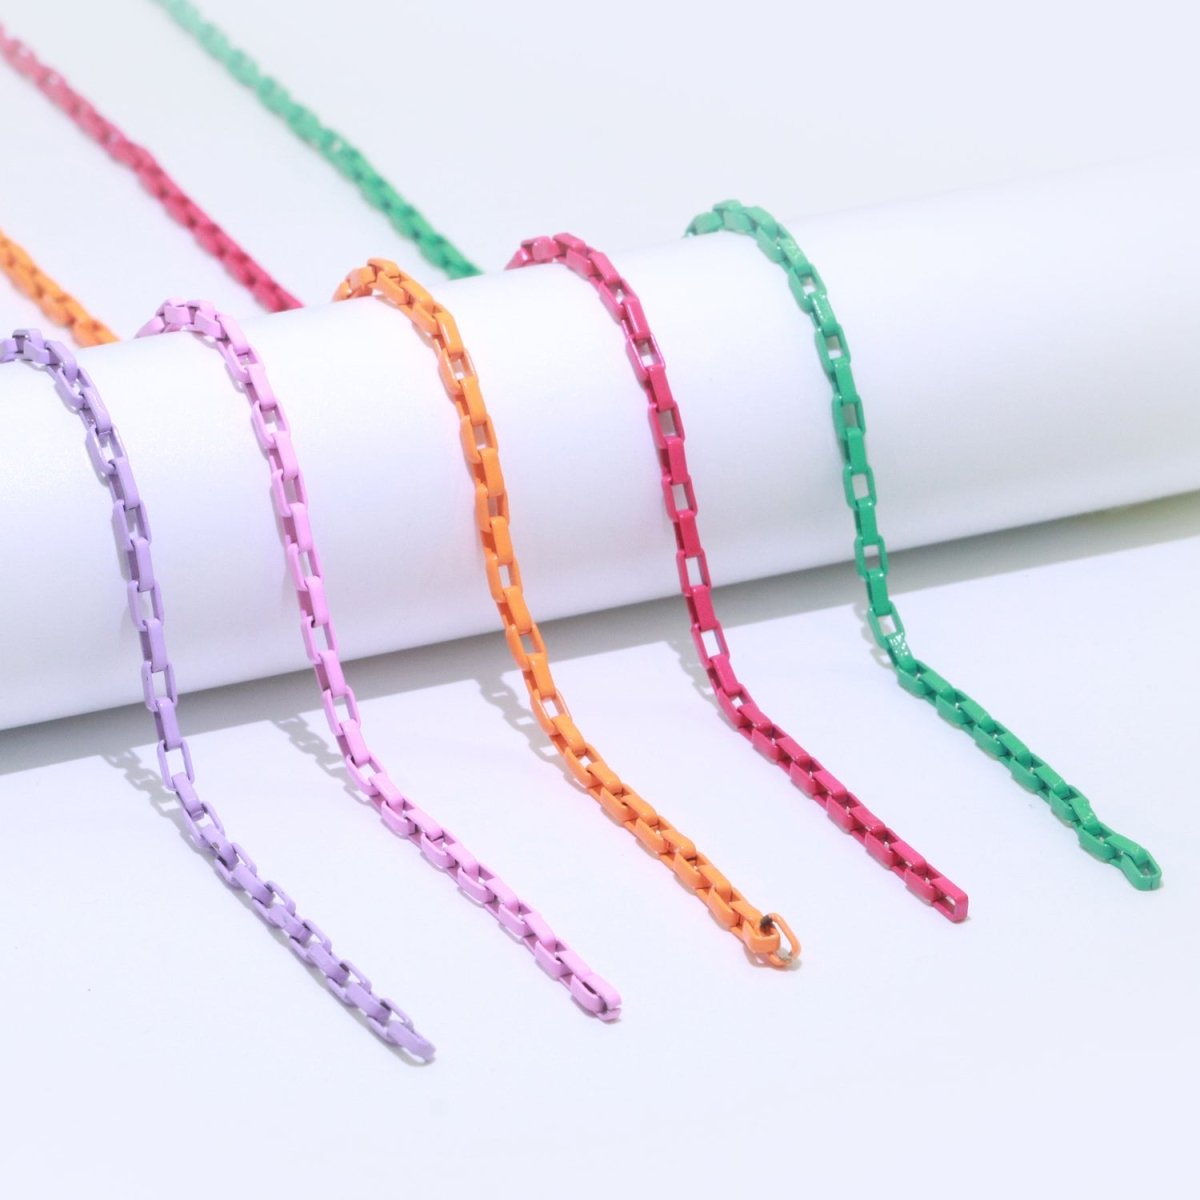 Enamel Paper Clip Cable Link Elongated Chain by Yard, Summer Colorful Chain Supply, Wholesale Bulk Roll Unfinished Chain for Jewelry Making | ROLL-543, ROLL-544, ROLL-545, ROLL-546, ROLL-547 Clearance Pricing - DLUXCA